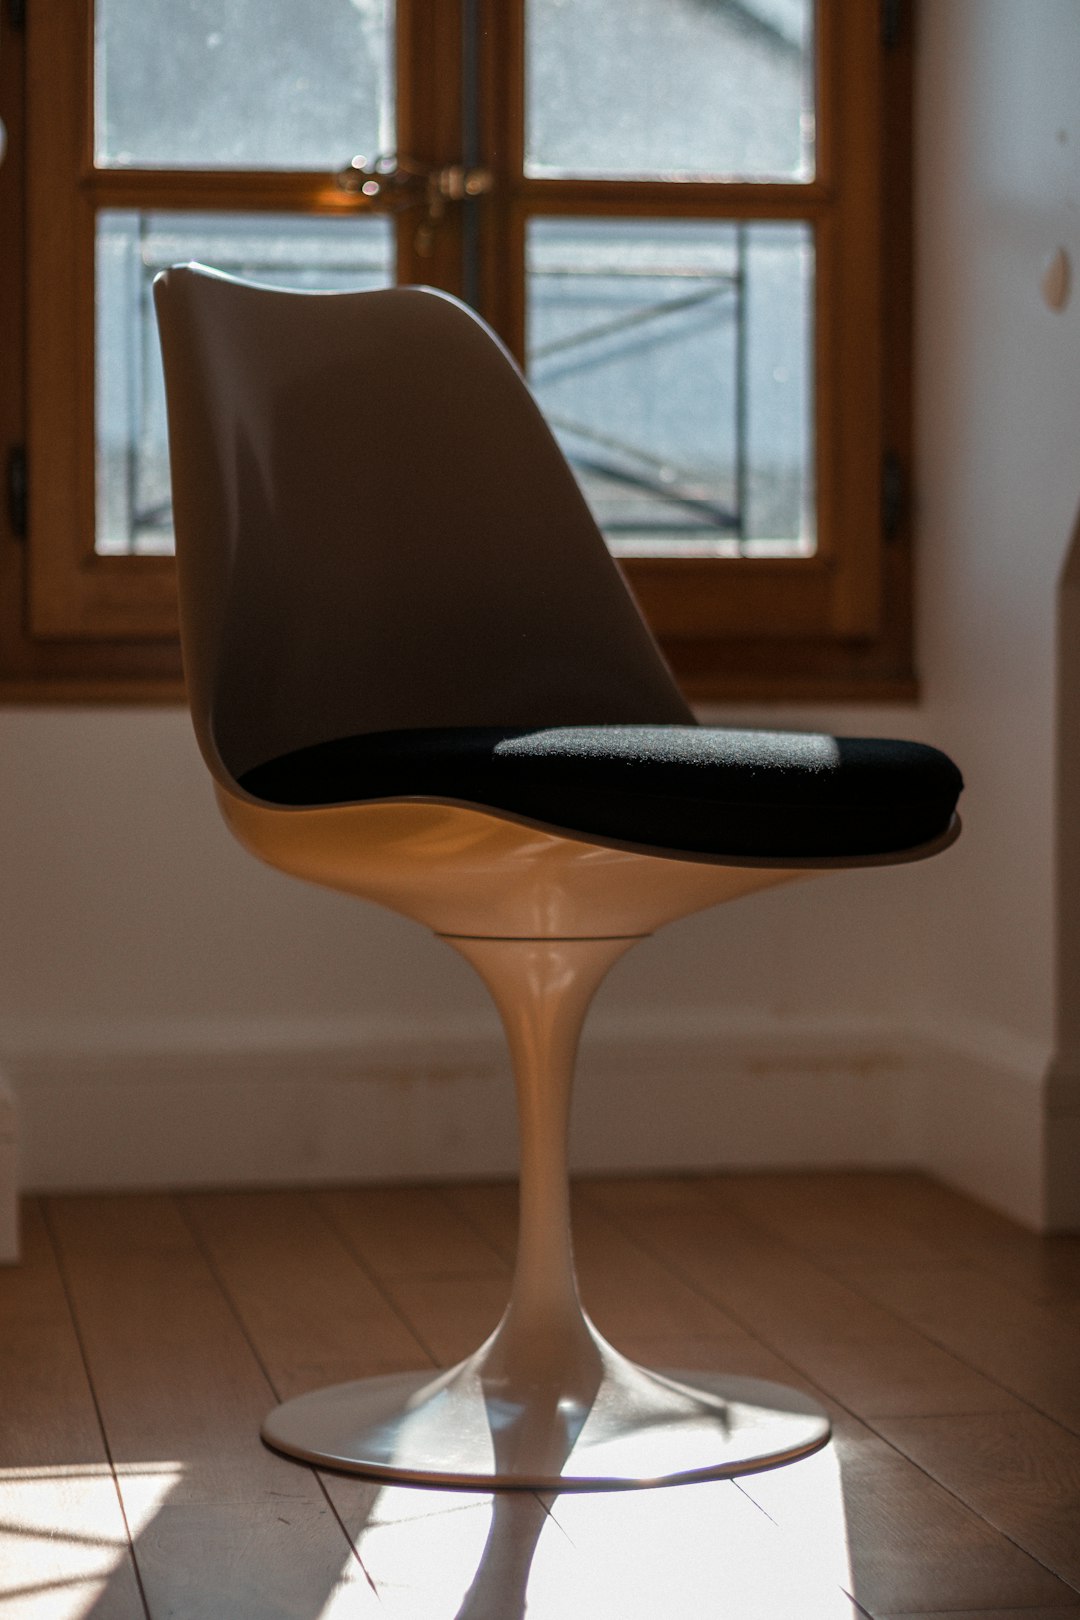 black and brown wooden chair